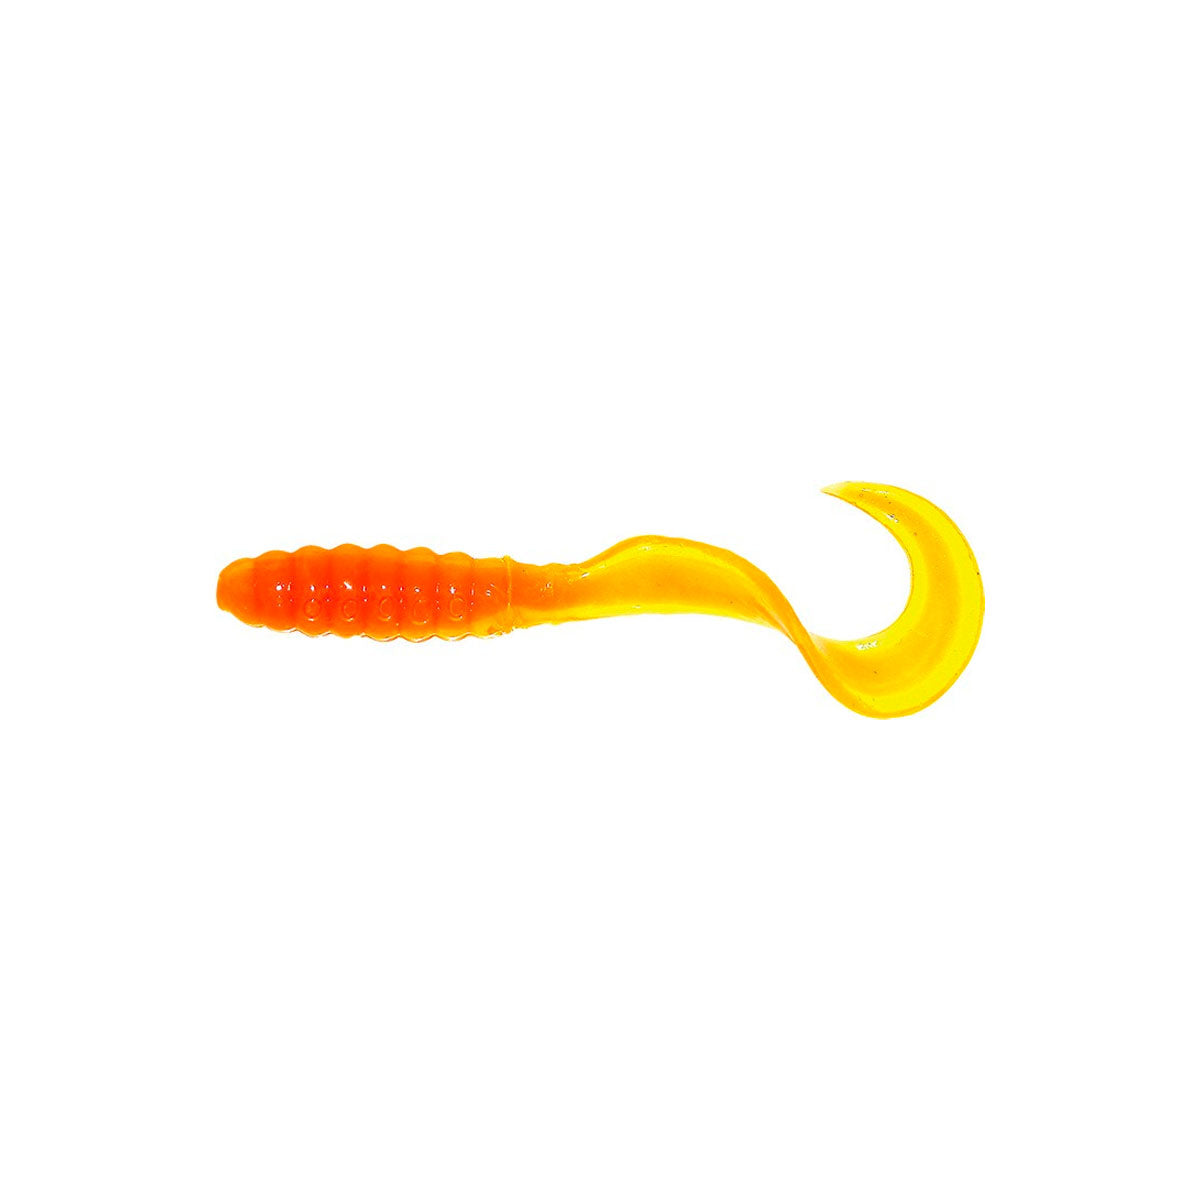 Meeny Tail_Chartreuse/Orange Core